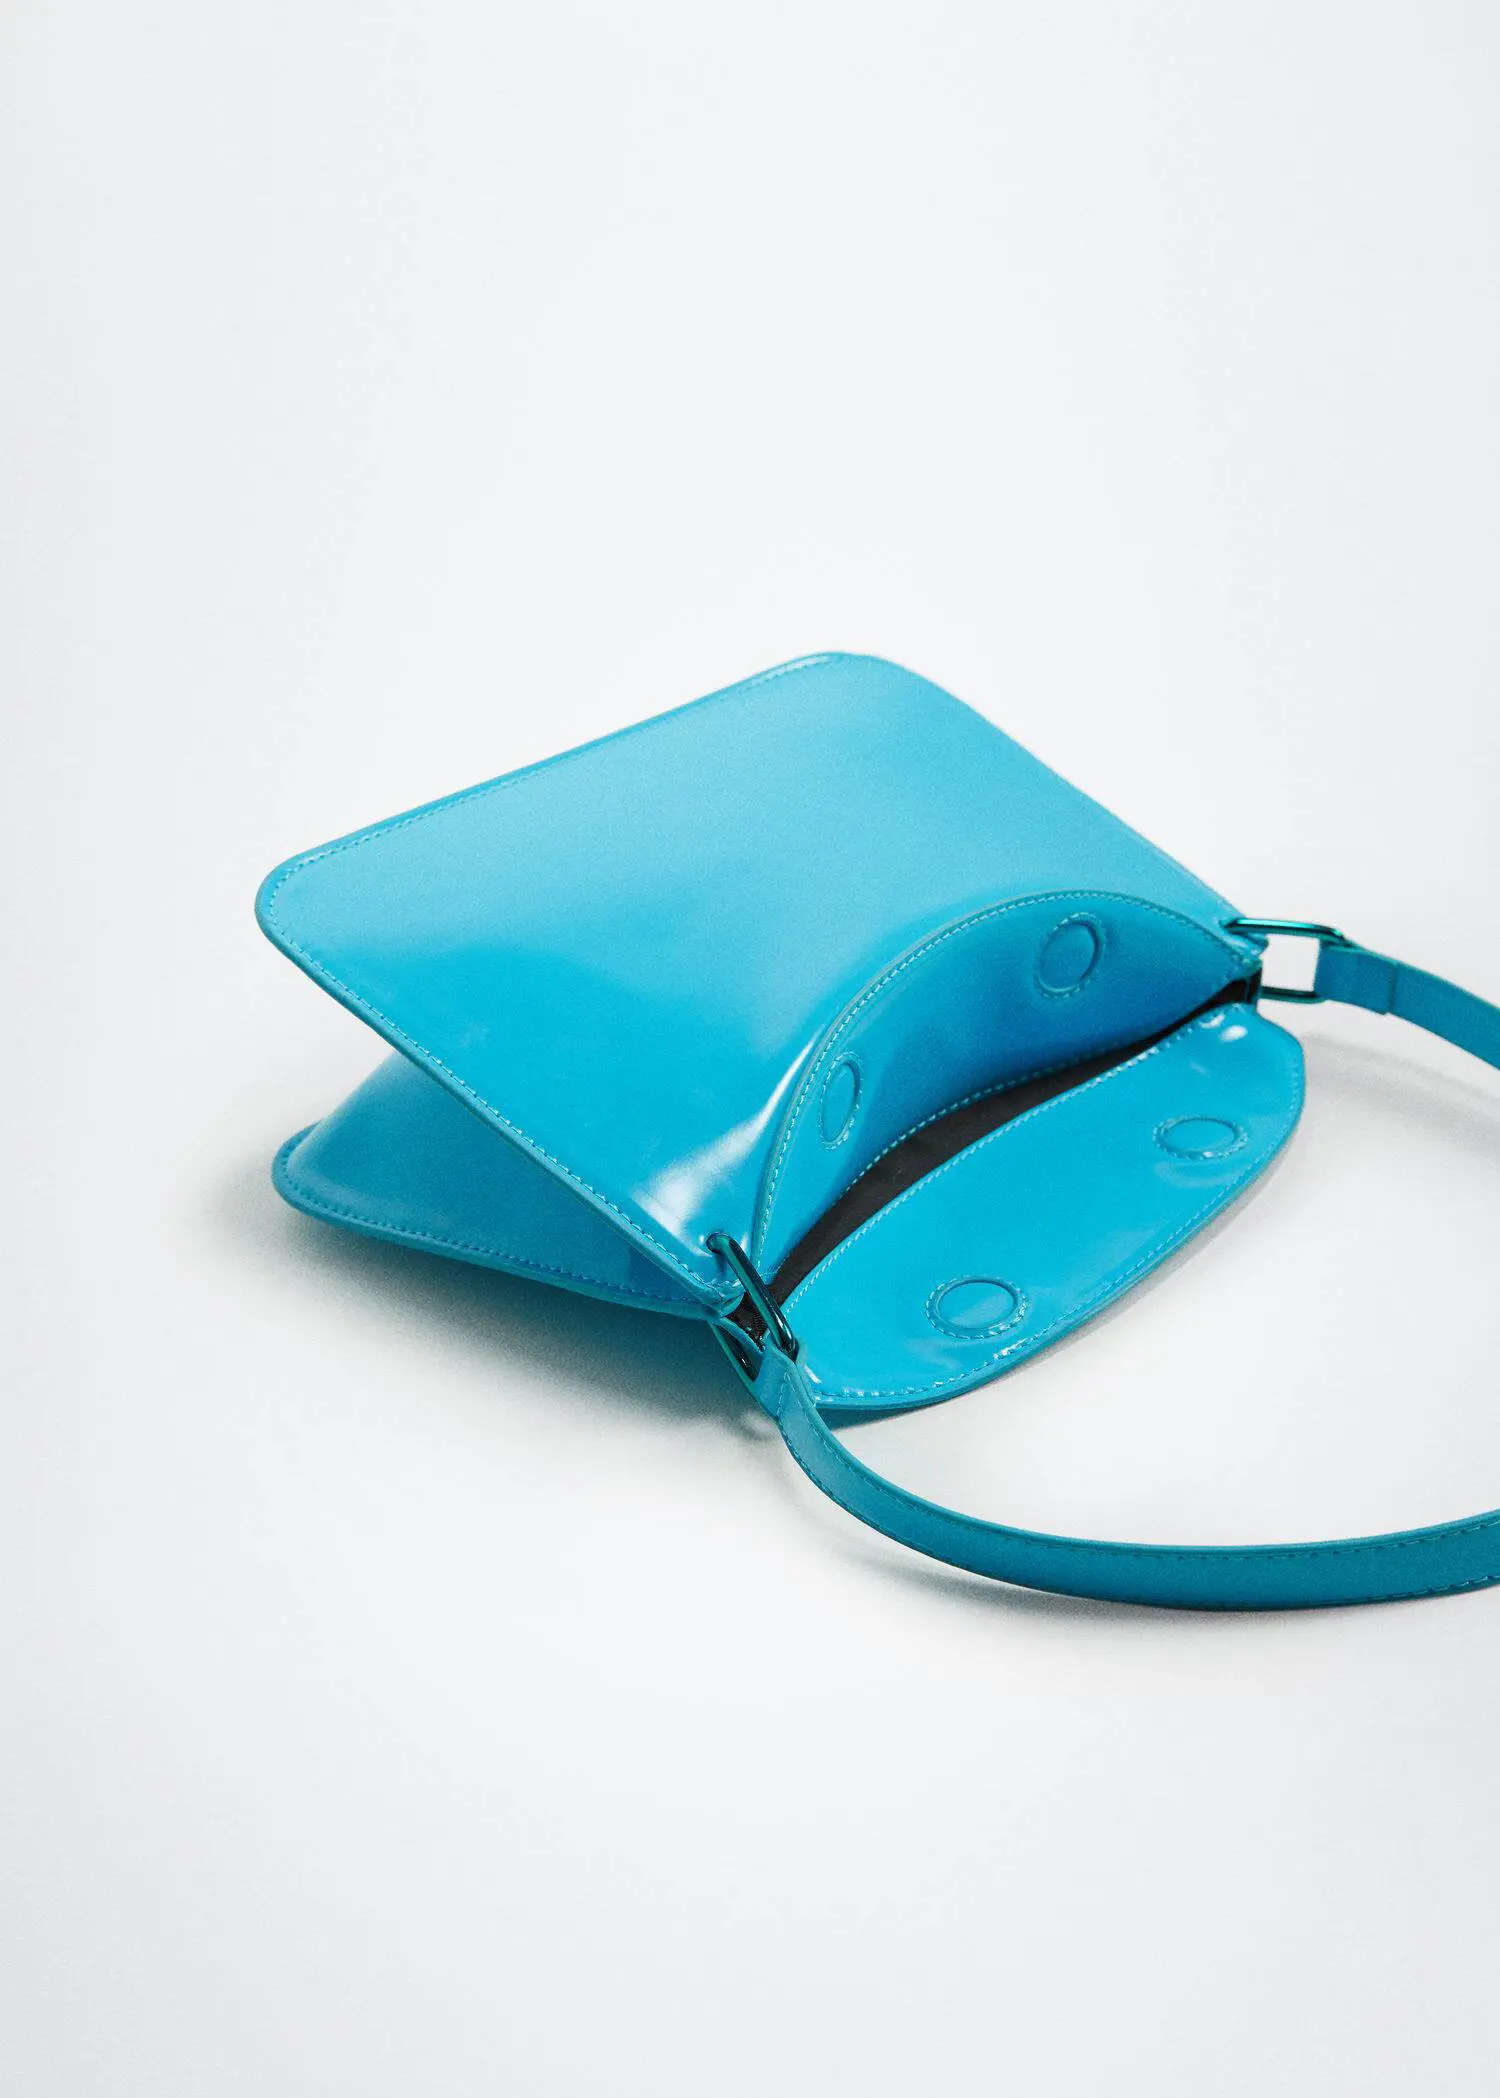 Mango Patent leather shoulder bag. a close up of a blue purse on a table 